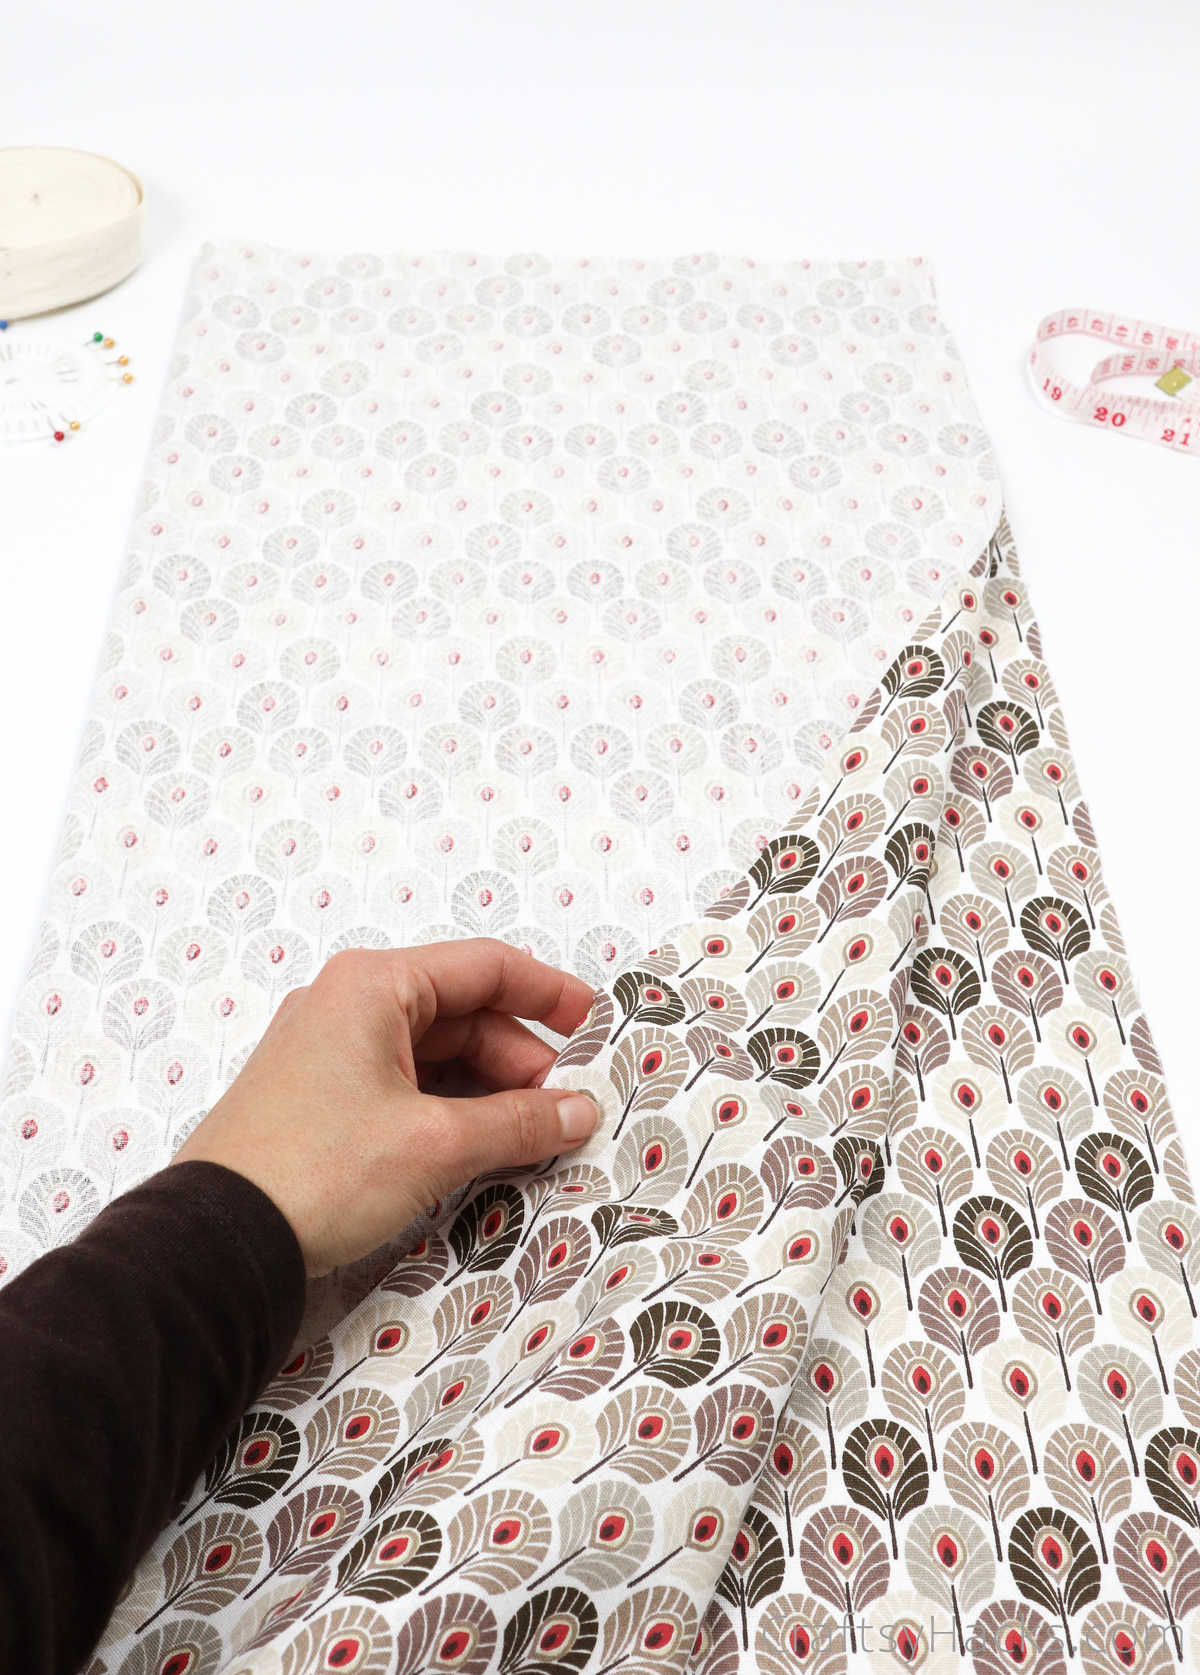 holding patterned fabric